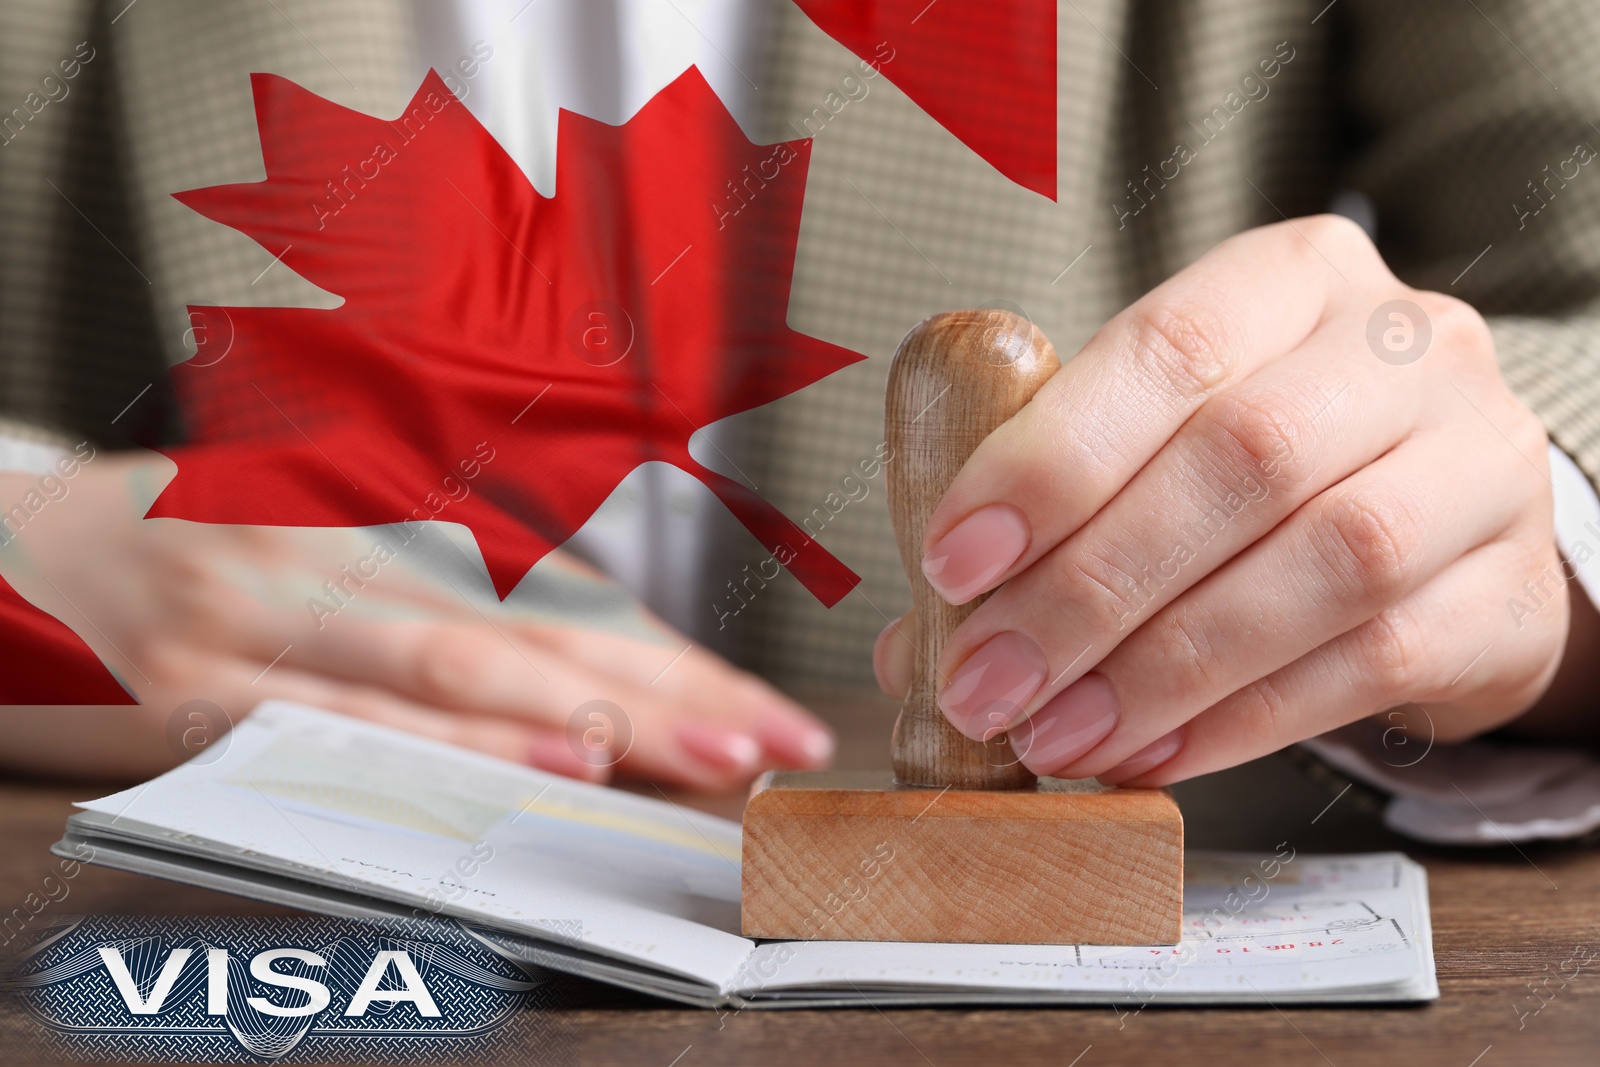 Image of Multiple exposure of woman stamping visa page in passport and flag of Canada, closeup